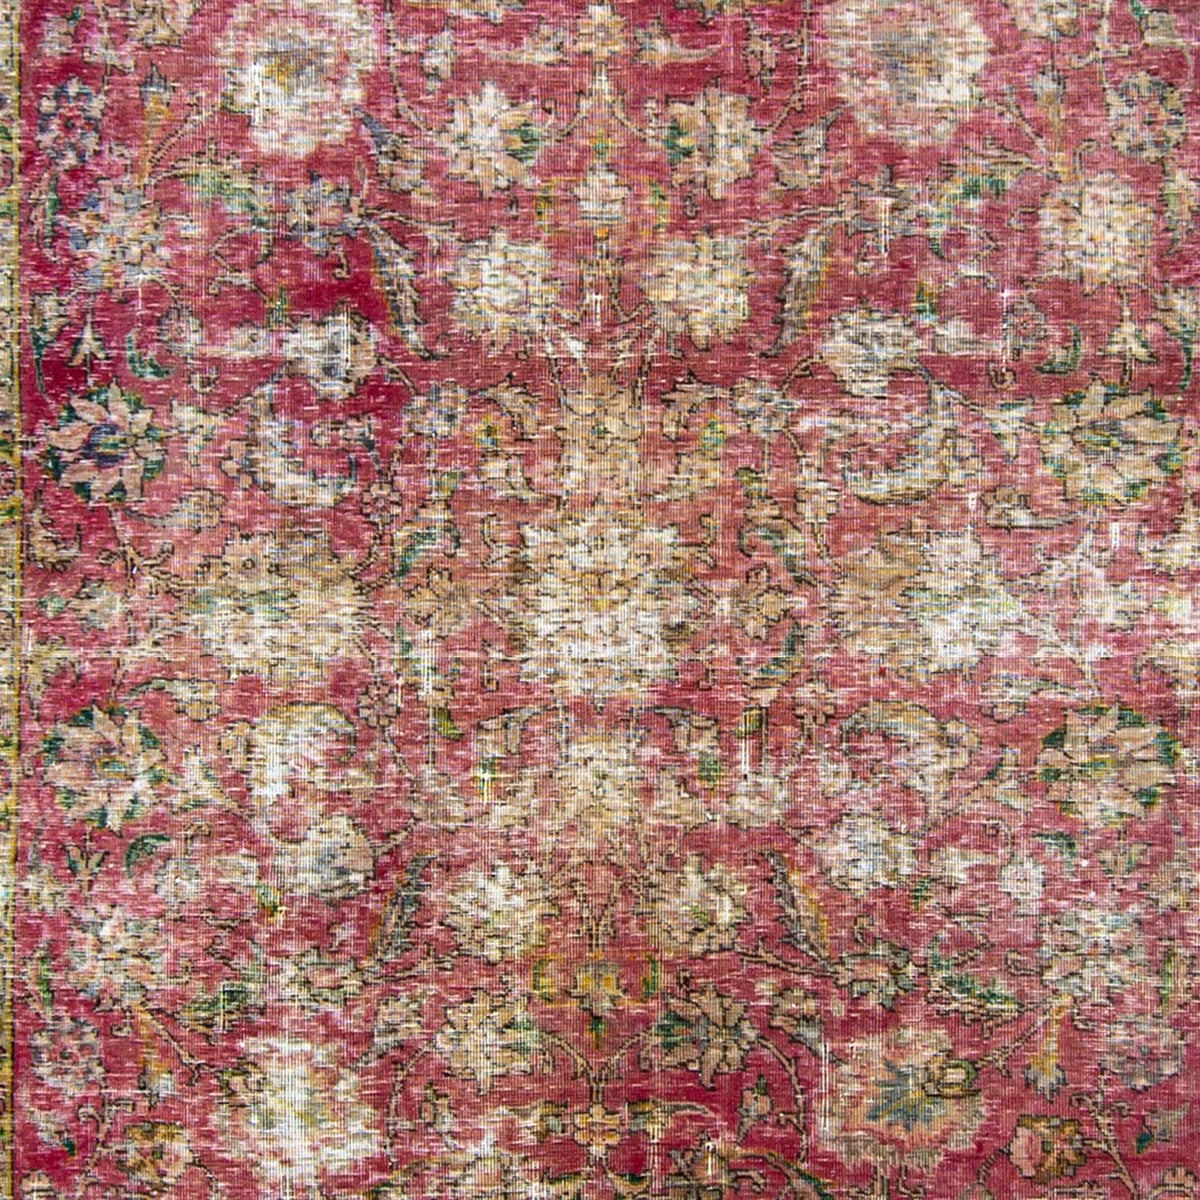 Hand-knotted Wool Persian Vintage Rug 194cm x 290cm